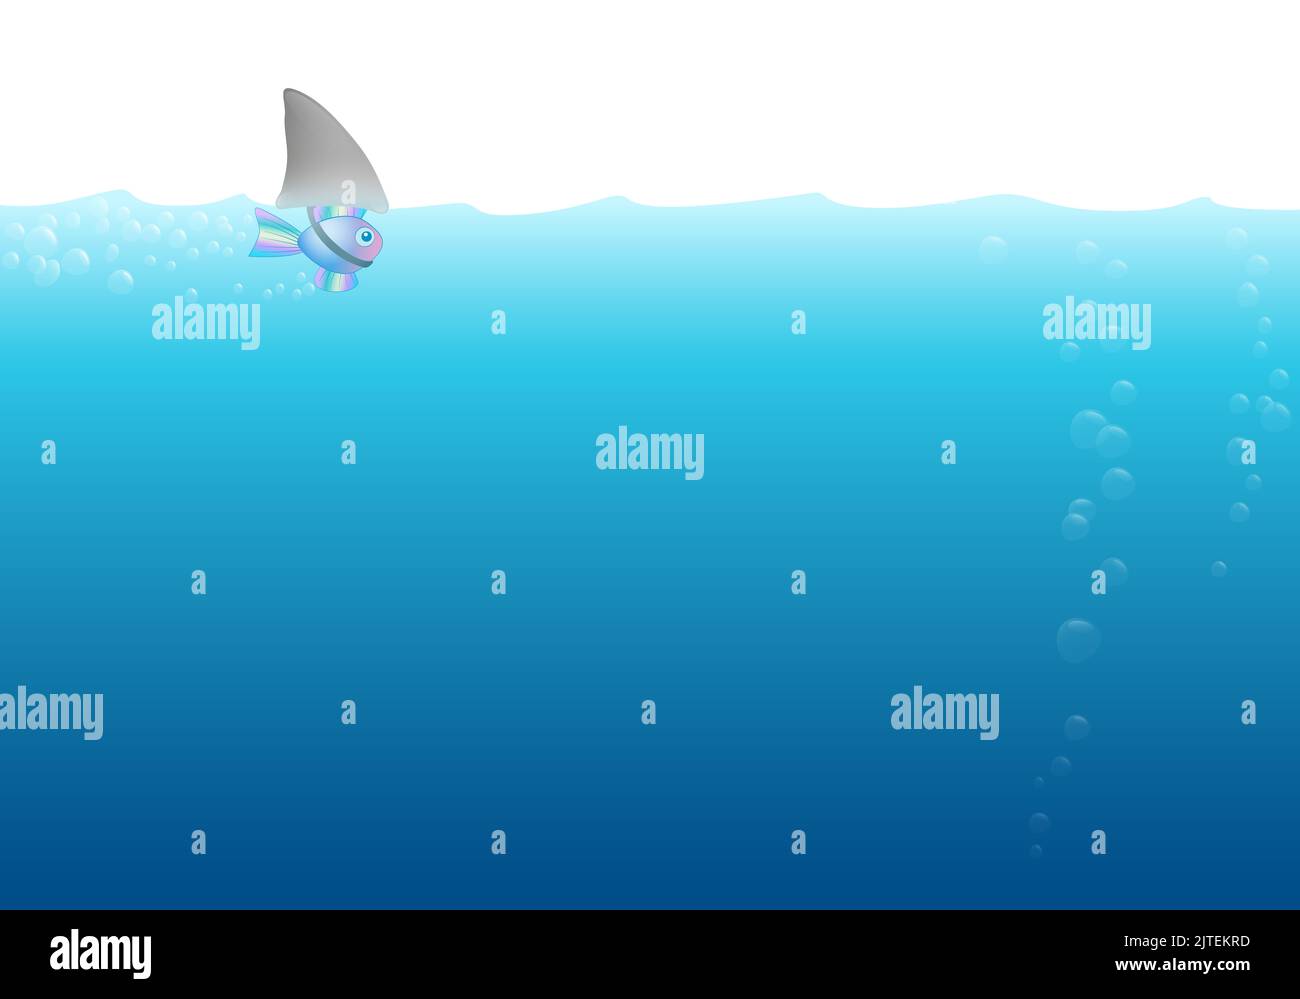 Small fish with fake shark fin costume swimming alone and anxious in deep dangerous ocean water background, with bubbles - comic illustration. Stock Photo